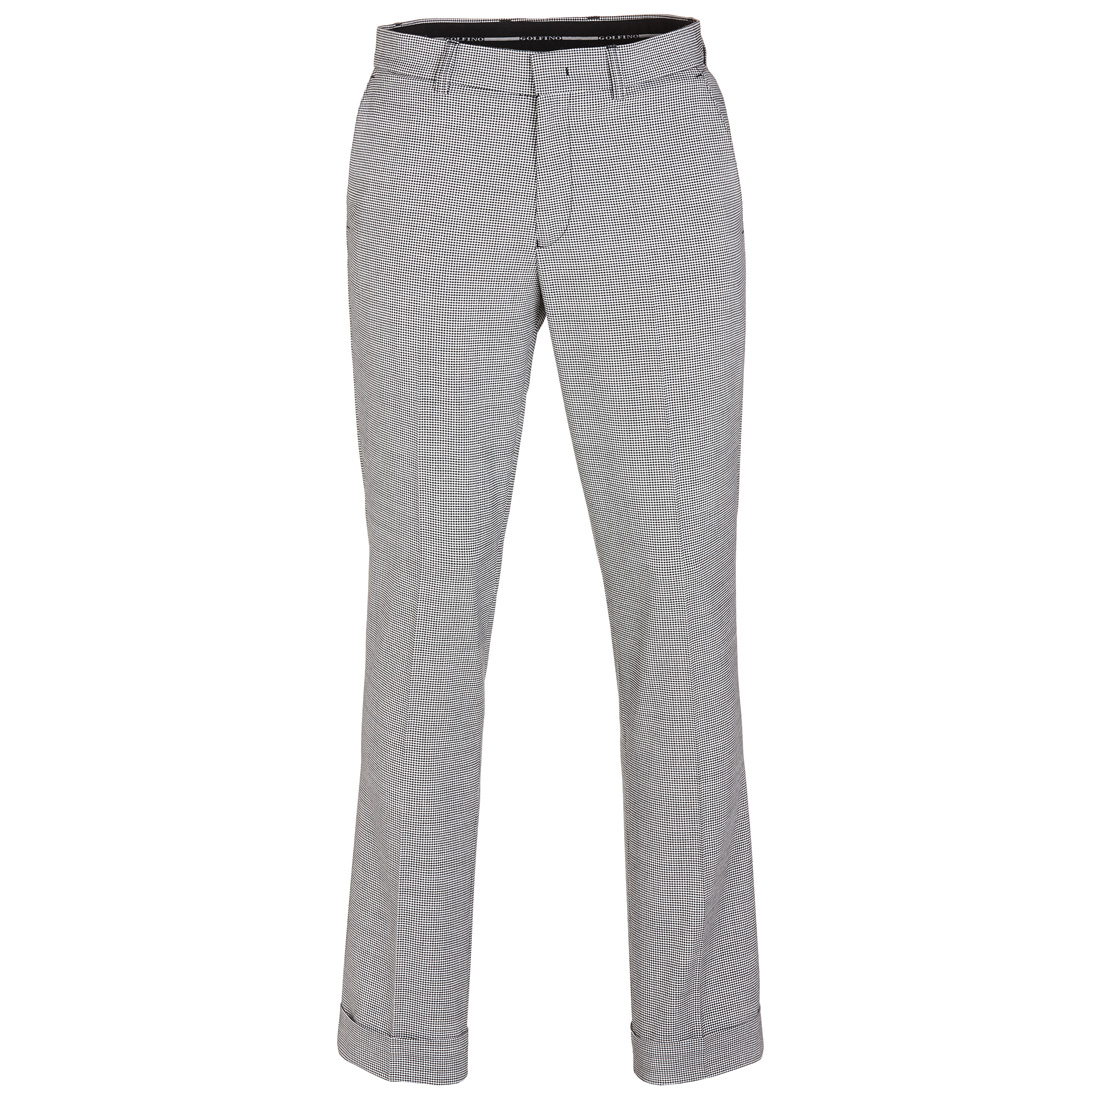 Vichy stretch golf trousers in slim fit for the best wearing comfort